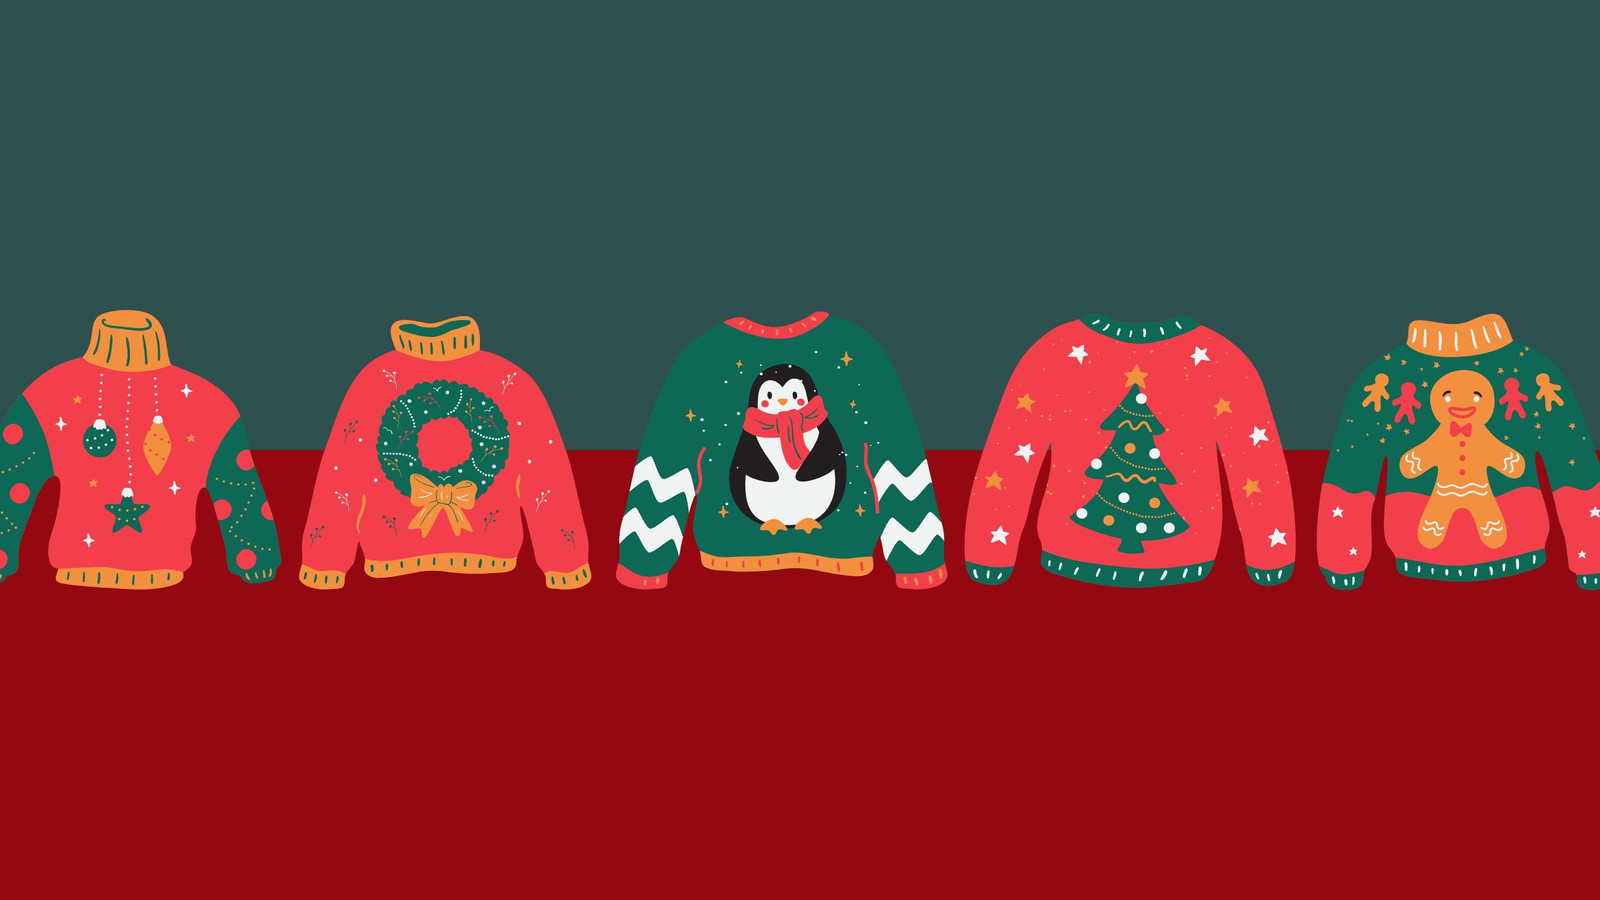 Ugly Christmas ugly christmas zoom background videos and images